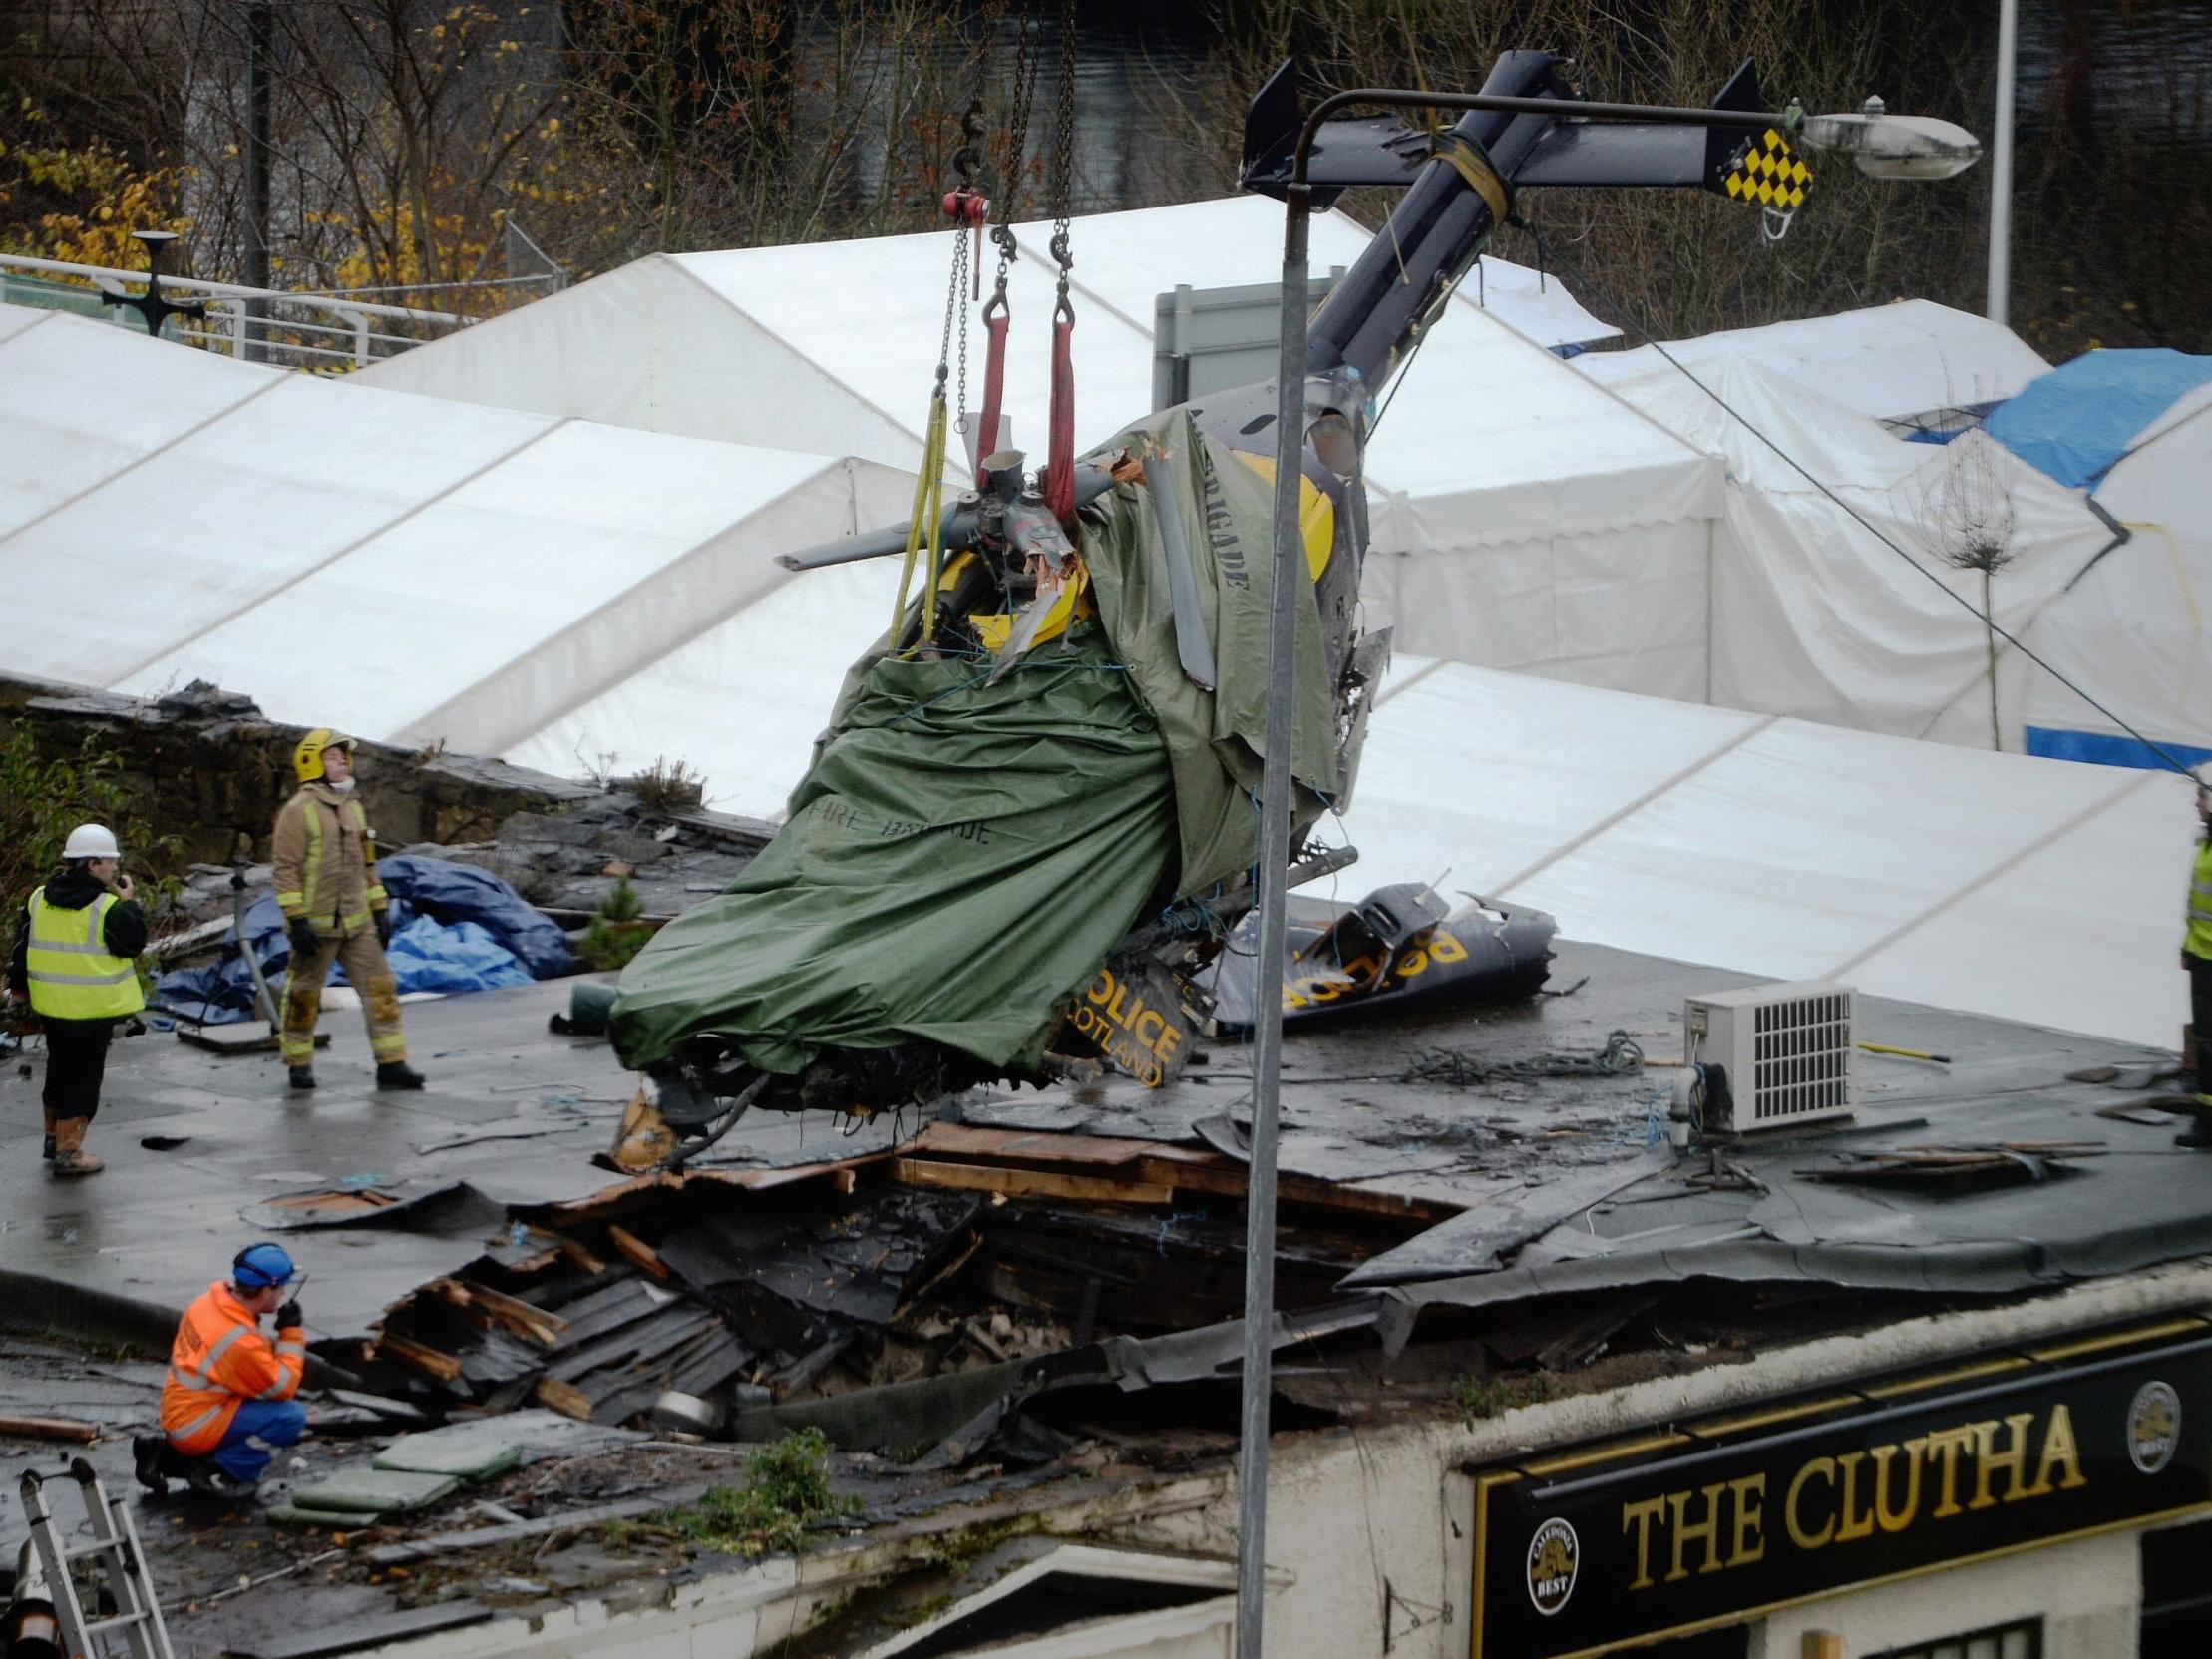 Rescuers lift the police helicopter wreckage from the roof of the Clutha pub in 2013